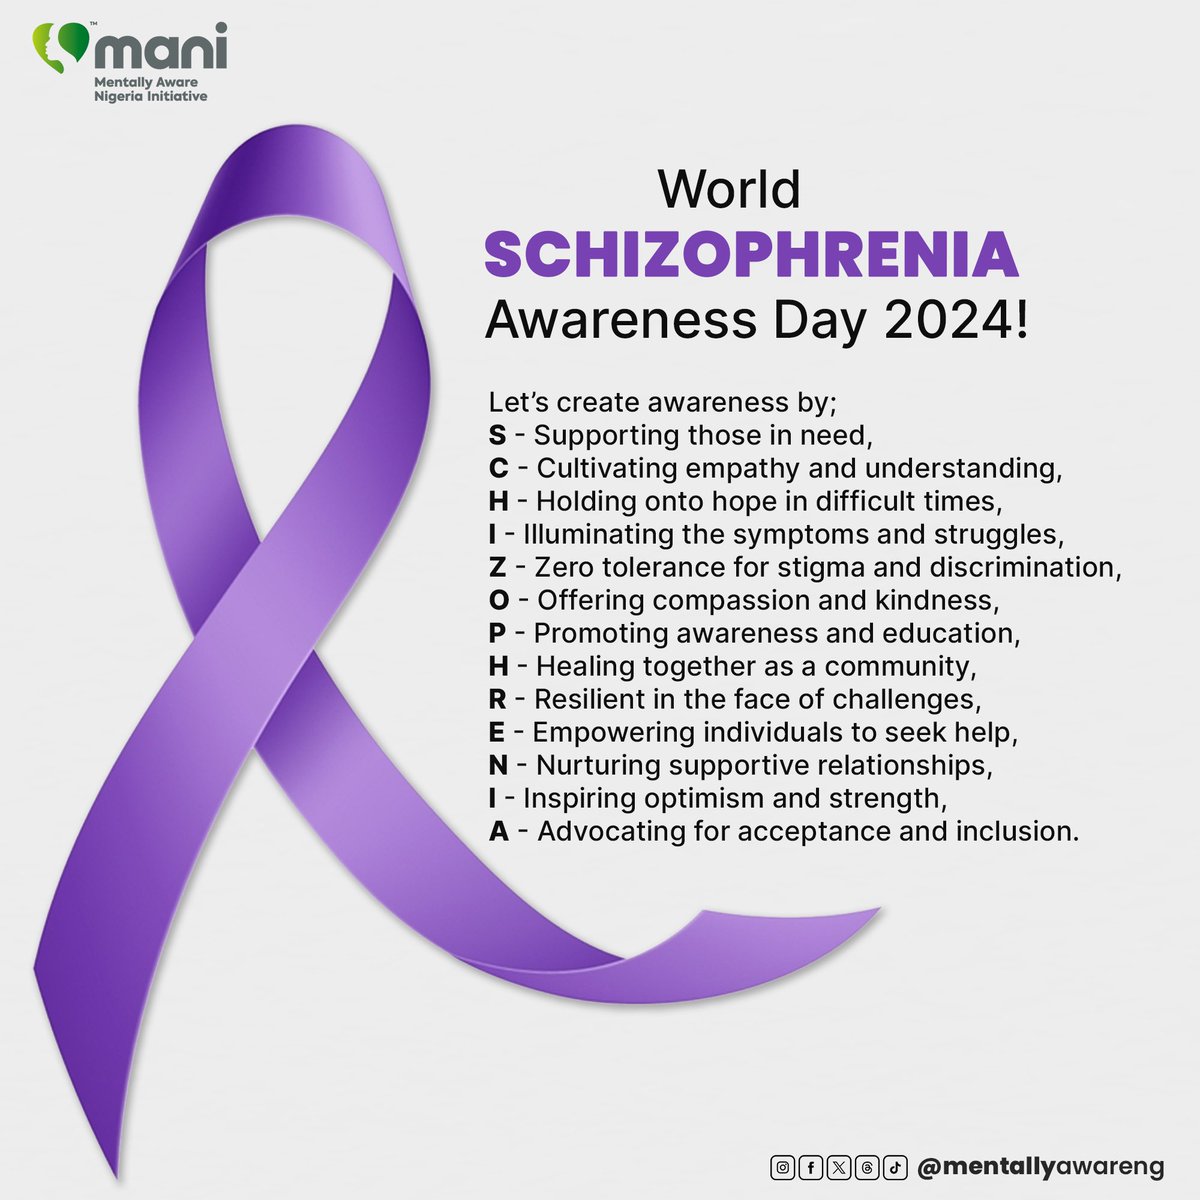 Today, we stand in solidarity with those affected by schizophrenia, raising awareness, and promoting compassion. Let's challenge stigma, foster understanding, and support those on their journey toward mental health recovery. Together, let's create a world where everyone feels